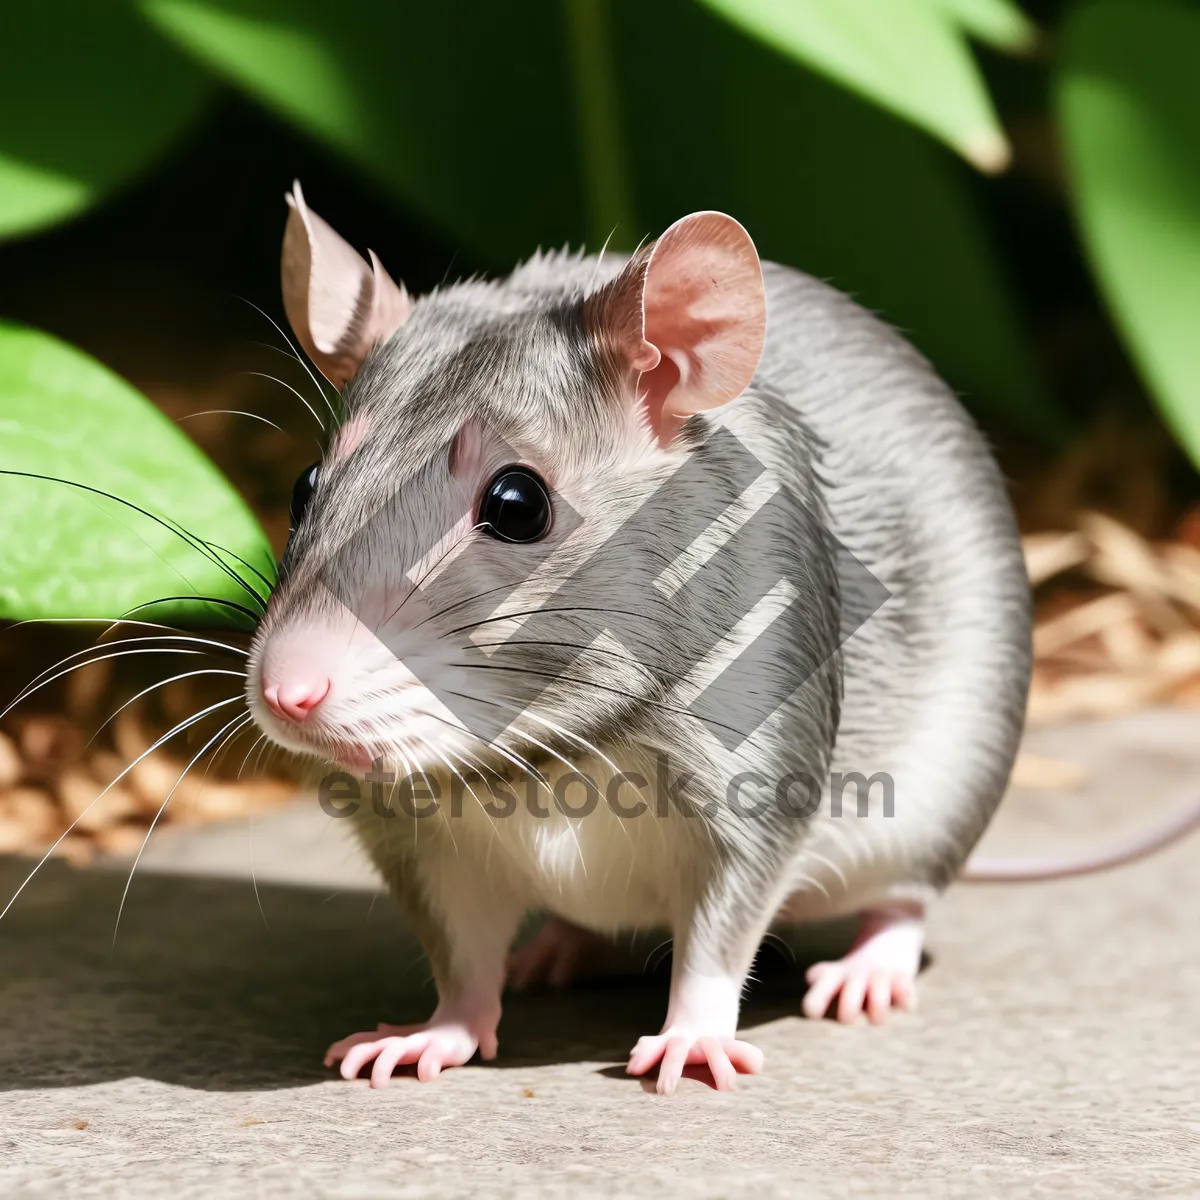 Picture of Playful Fur-Friend: Adorable Gray Mouse with Fluffy Tail